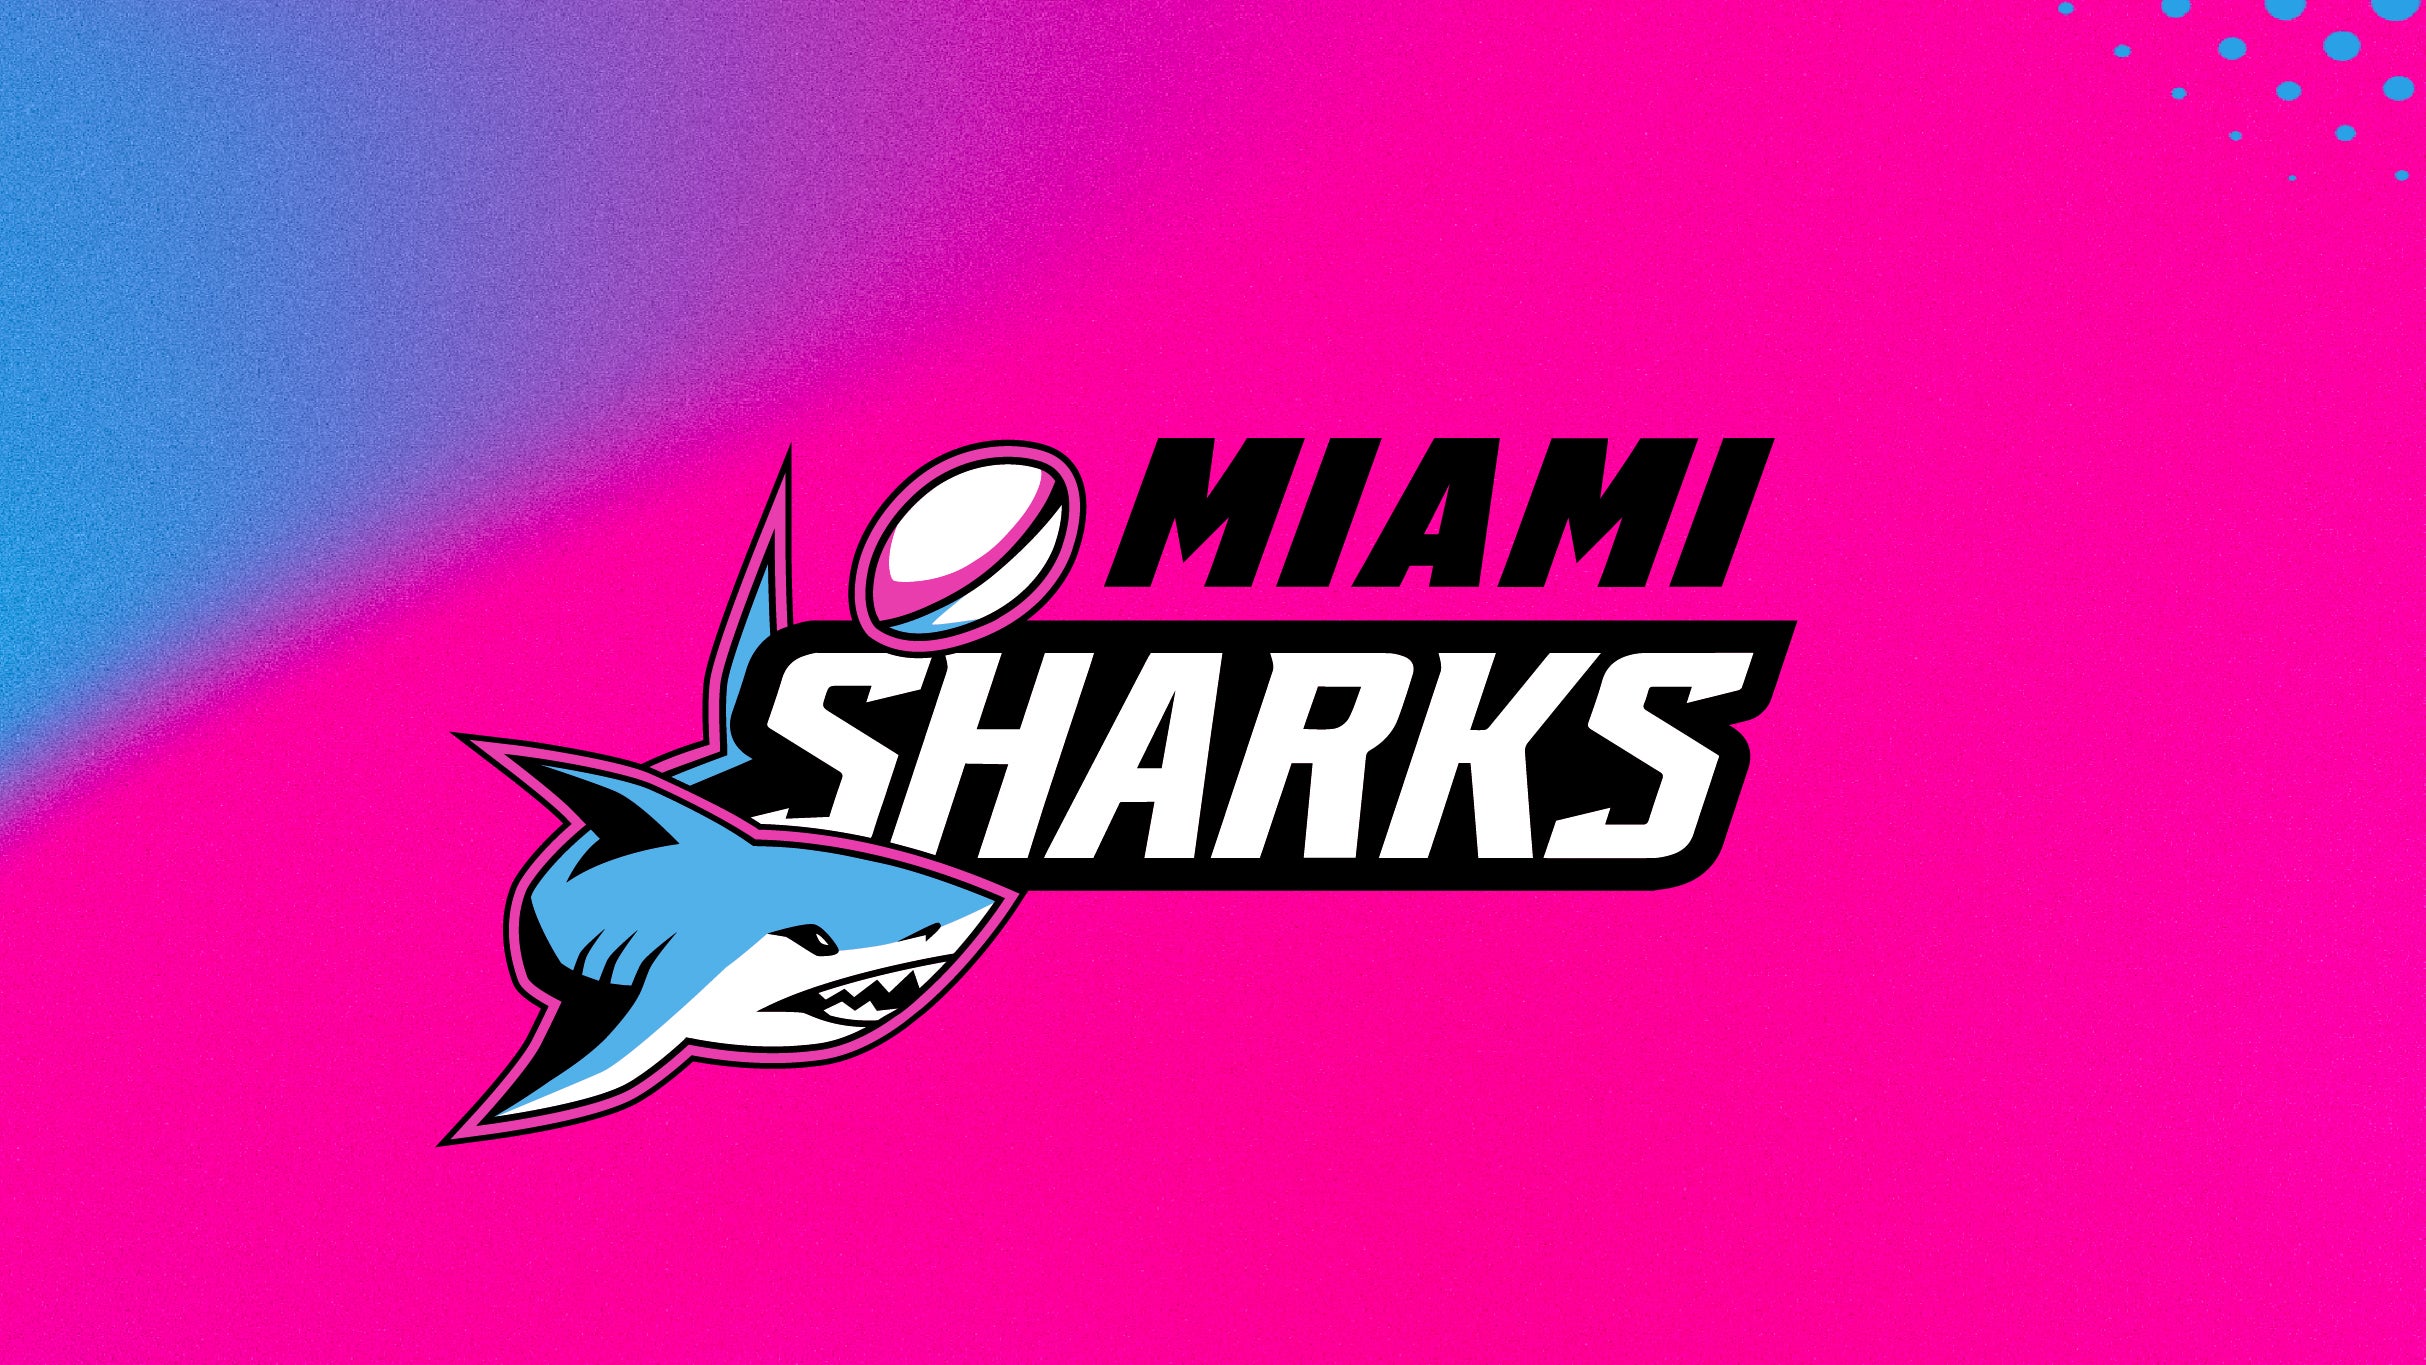 Miami Sharks vs Old Glory DC in Fort Lauderdale promo photo for Valentine´s Day presale offer code